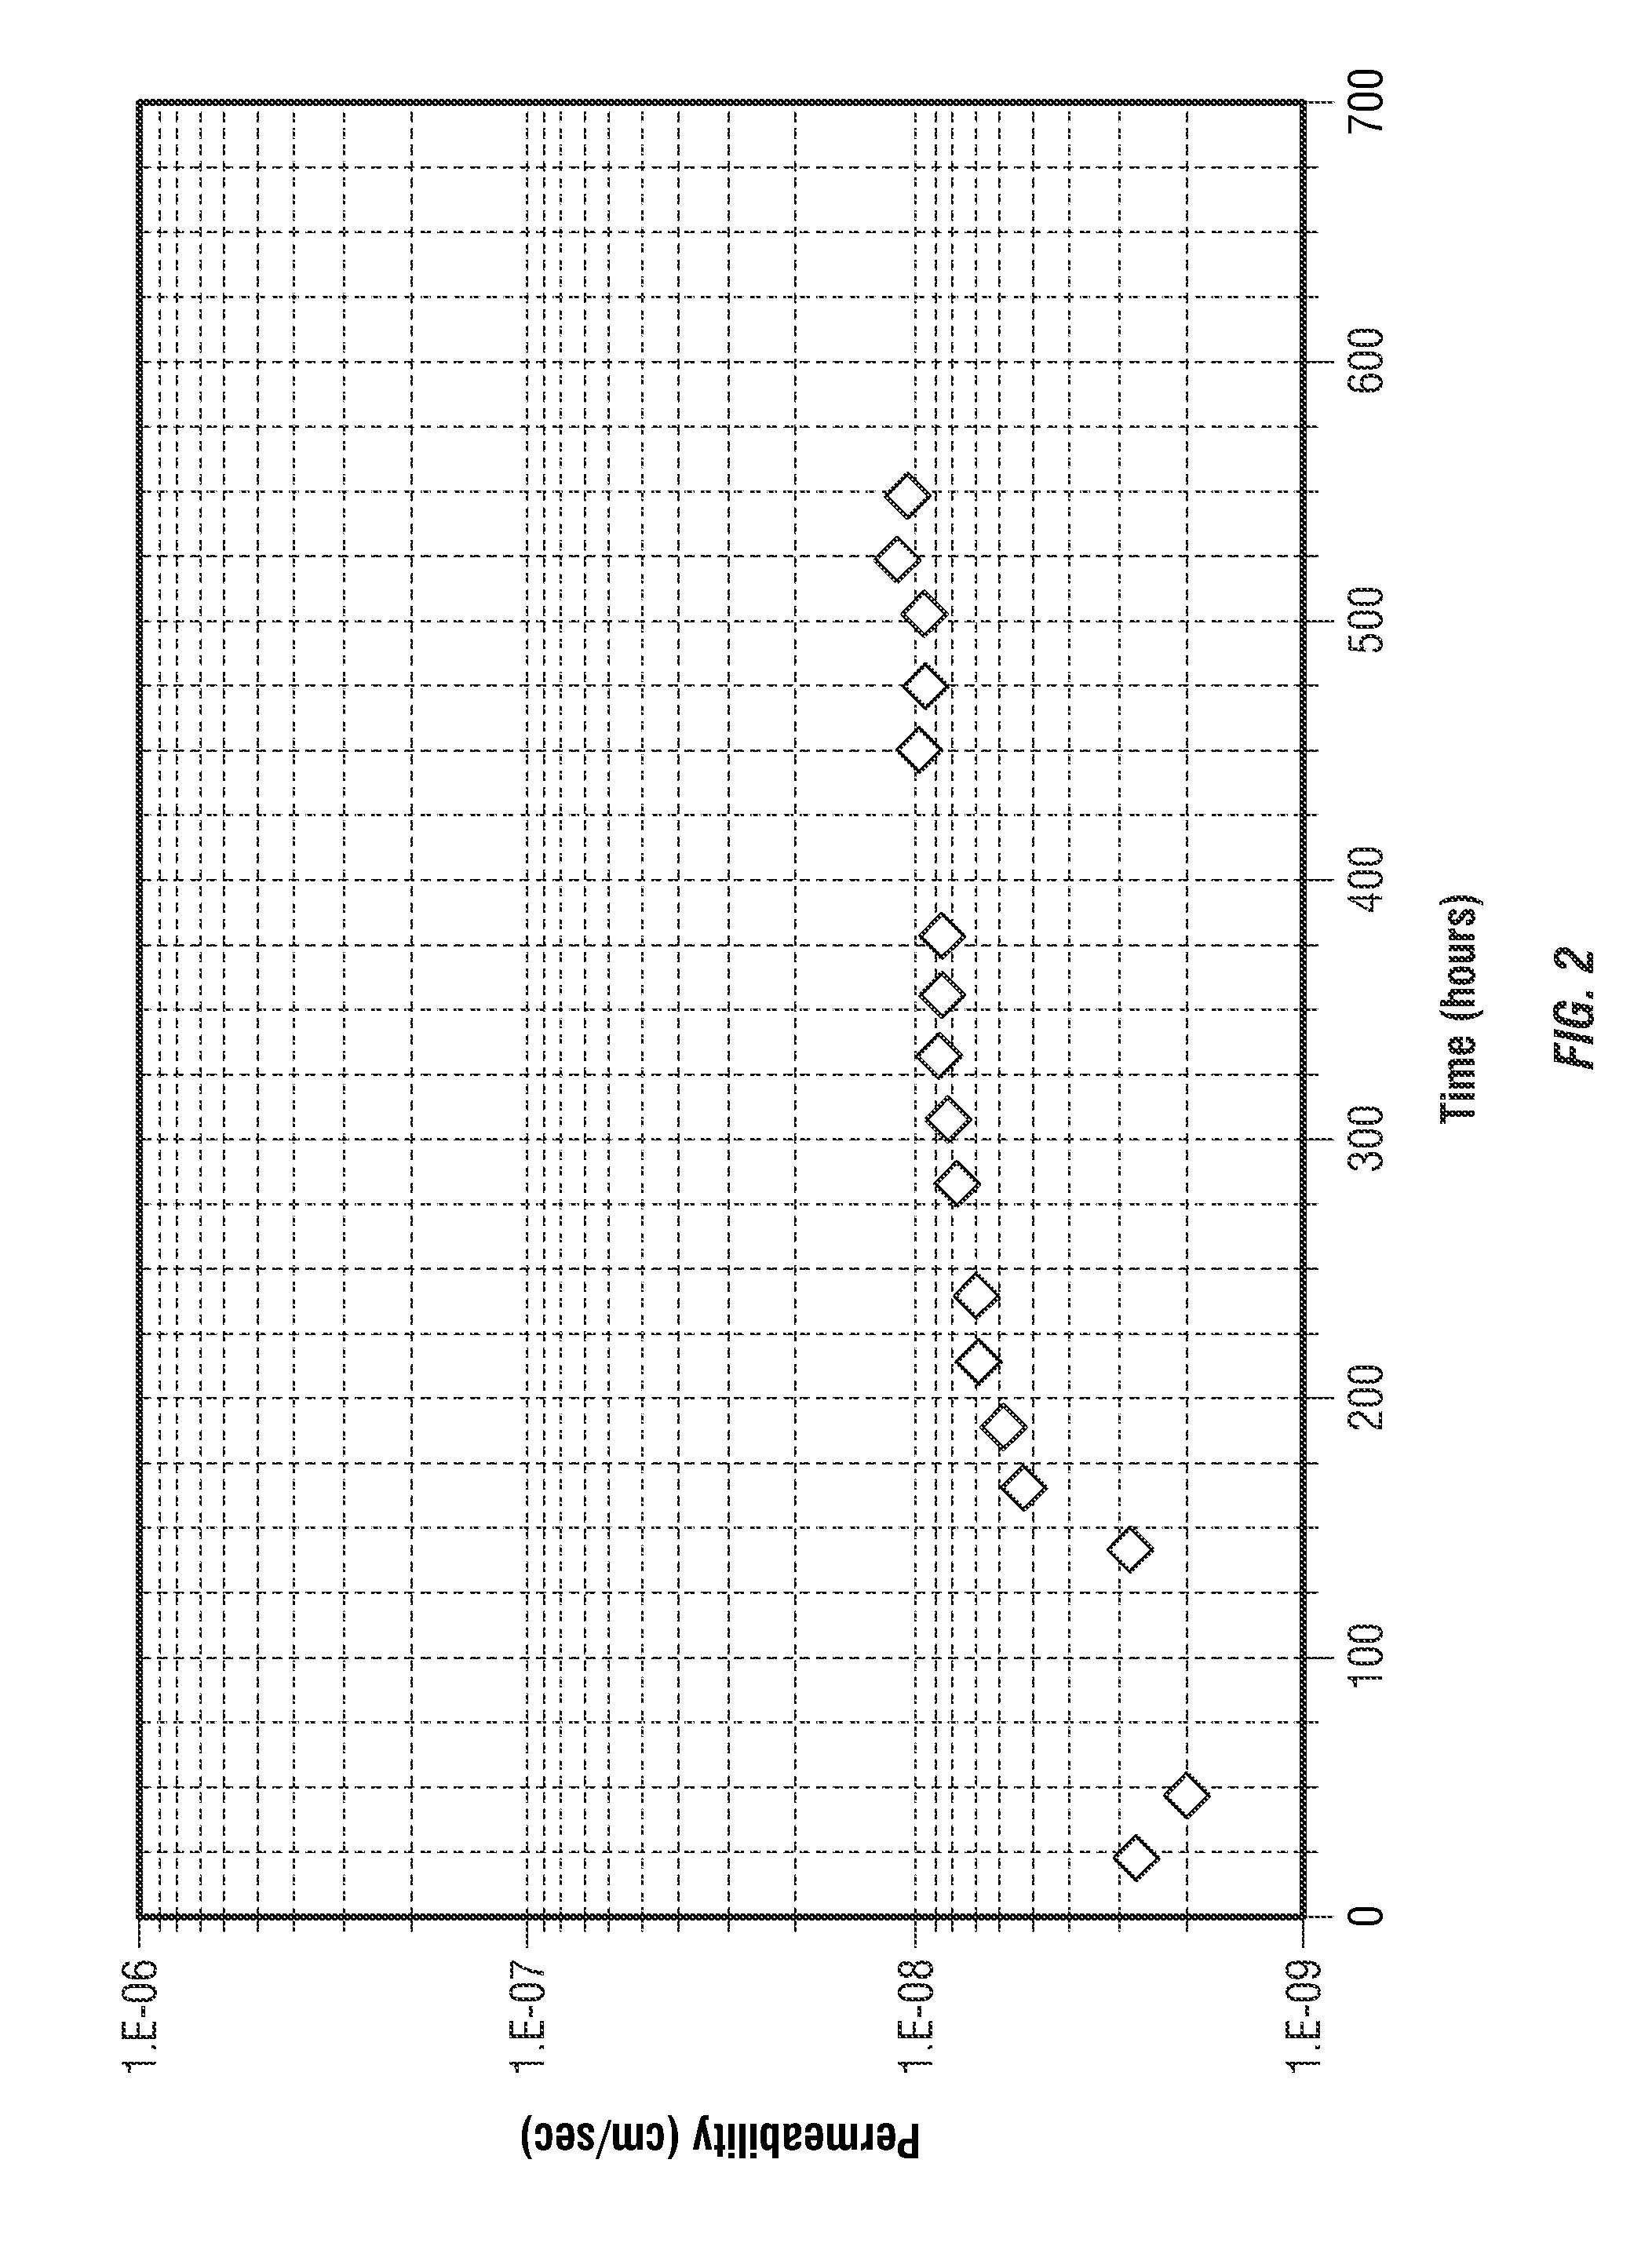 Bentonite barrier compositions and related geosynthetic clay liners for use in containment applications